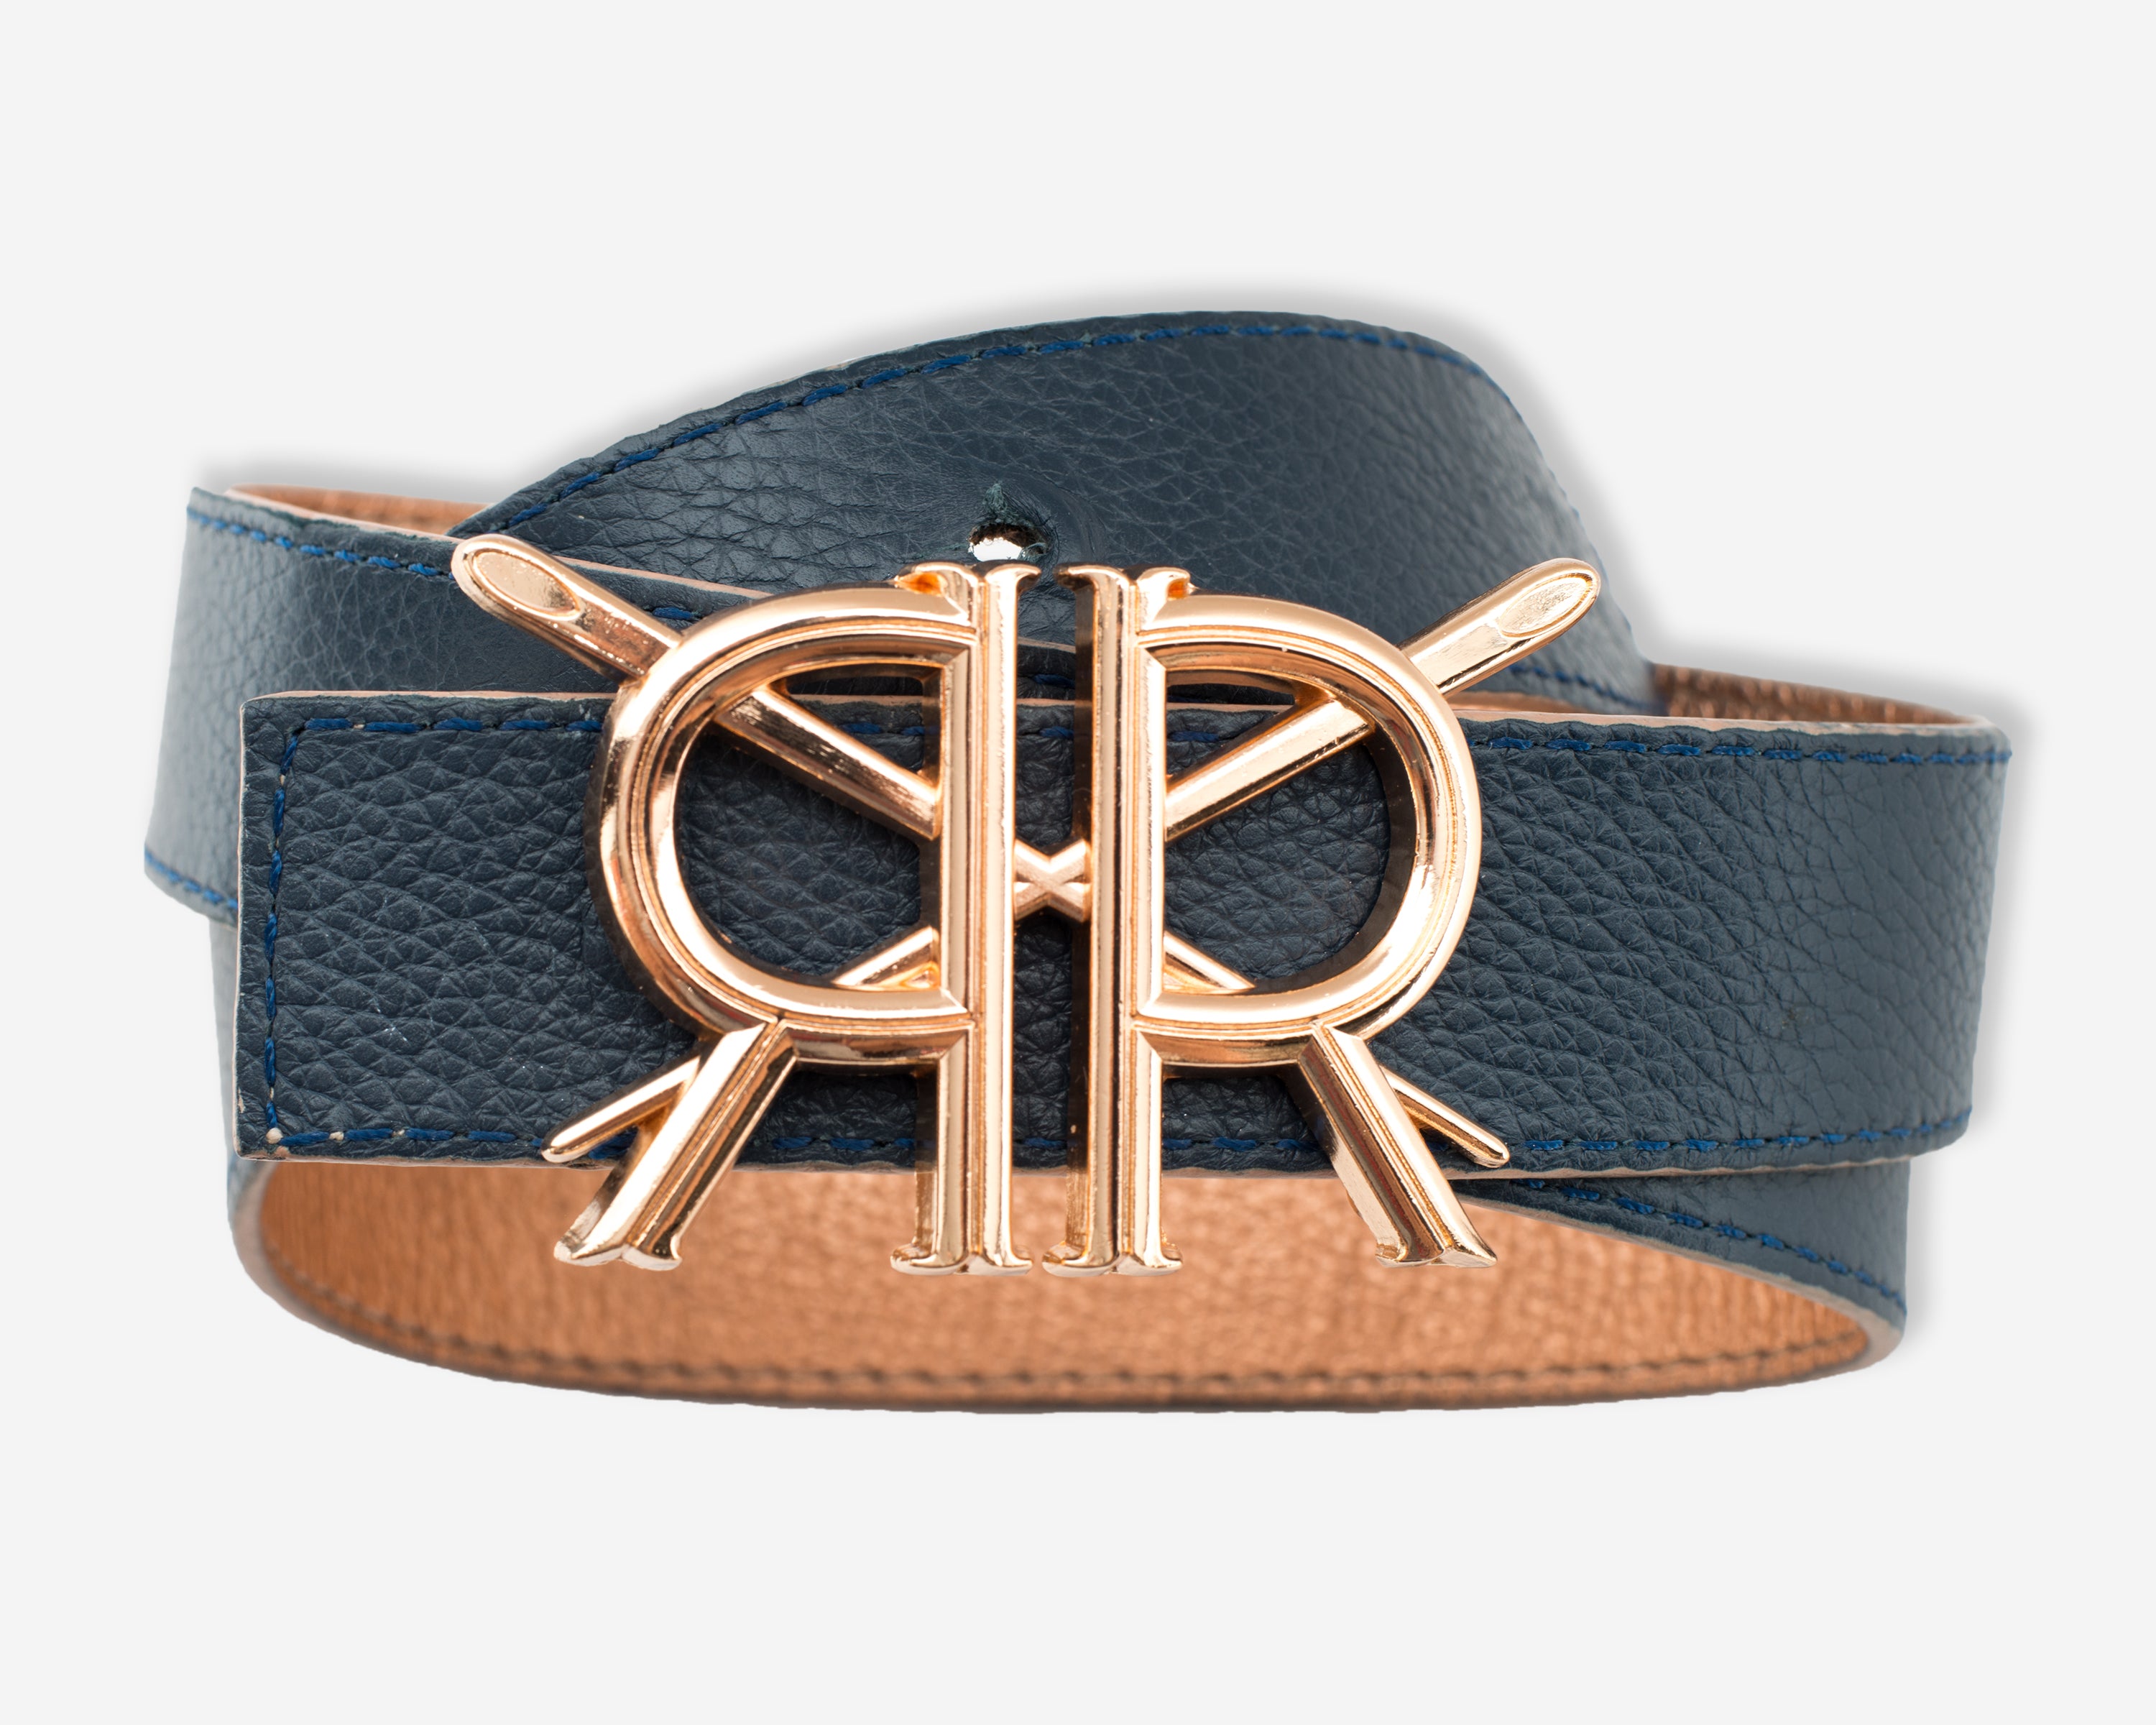 Gold and Silver Star Inlay Belt Strap with Buckle – Double R Brand - Dallas